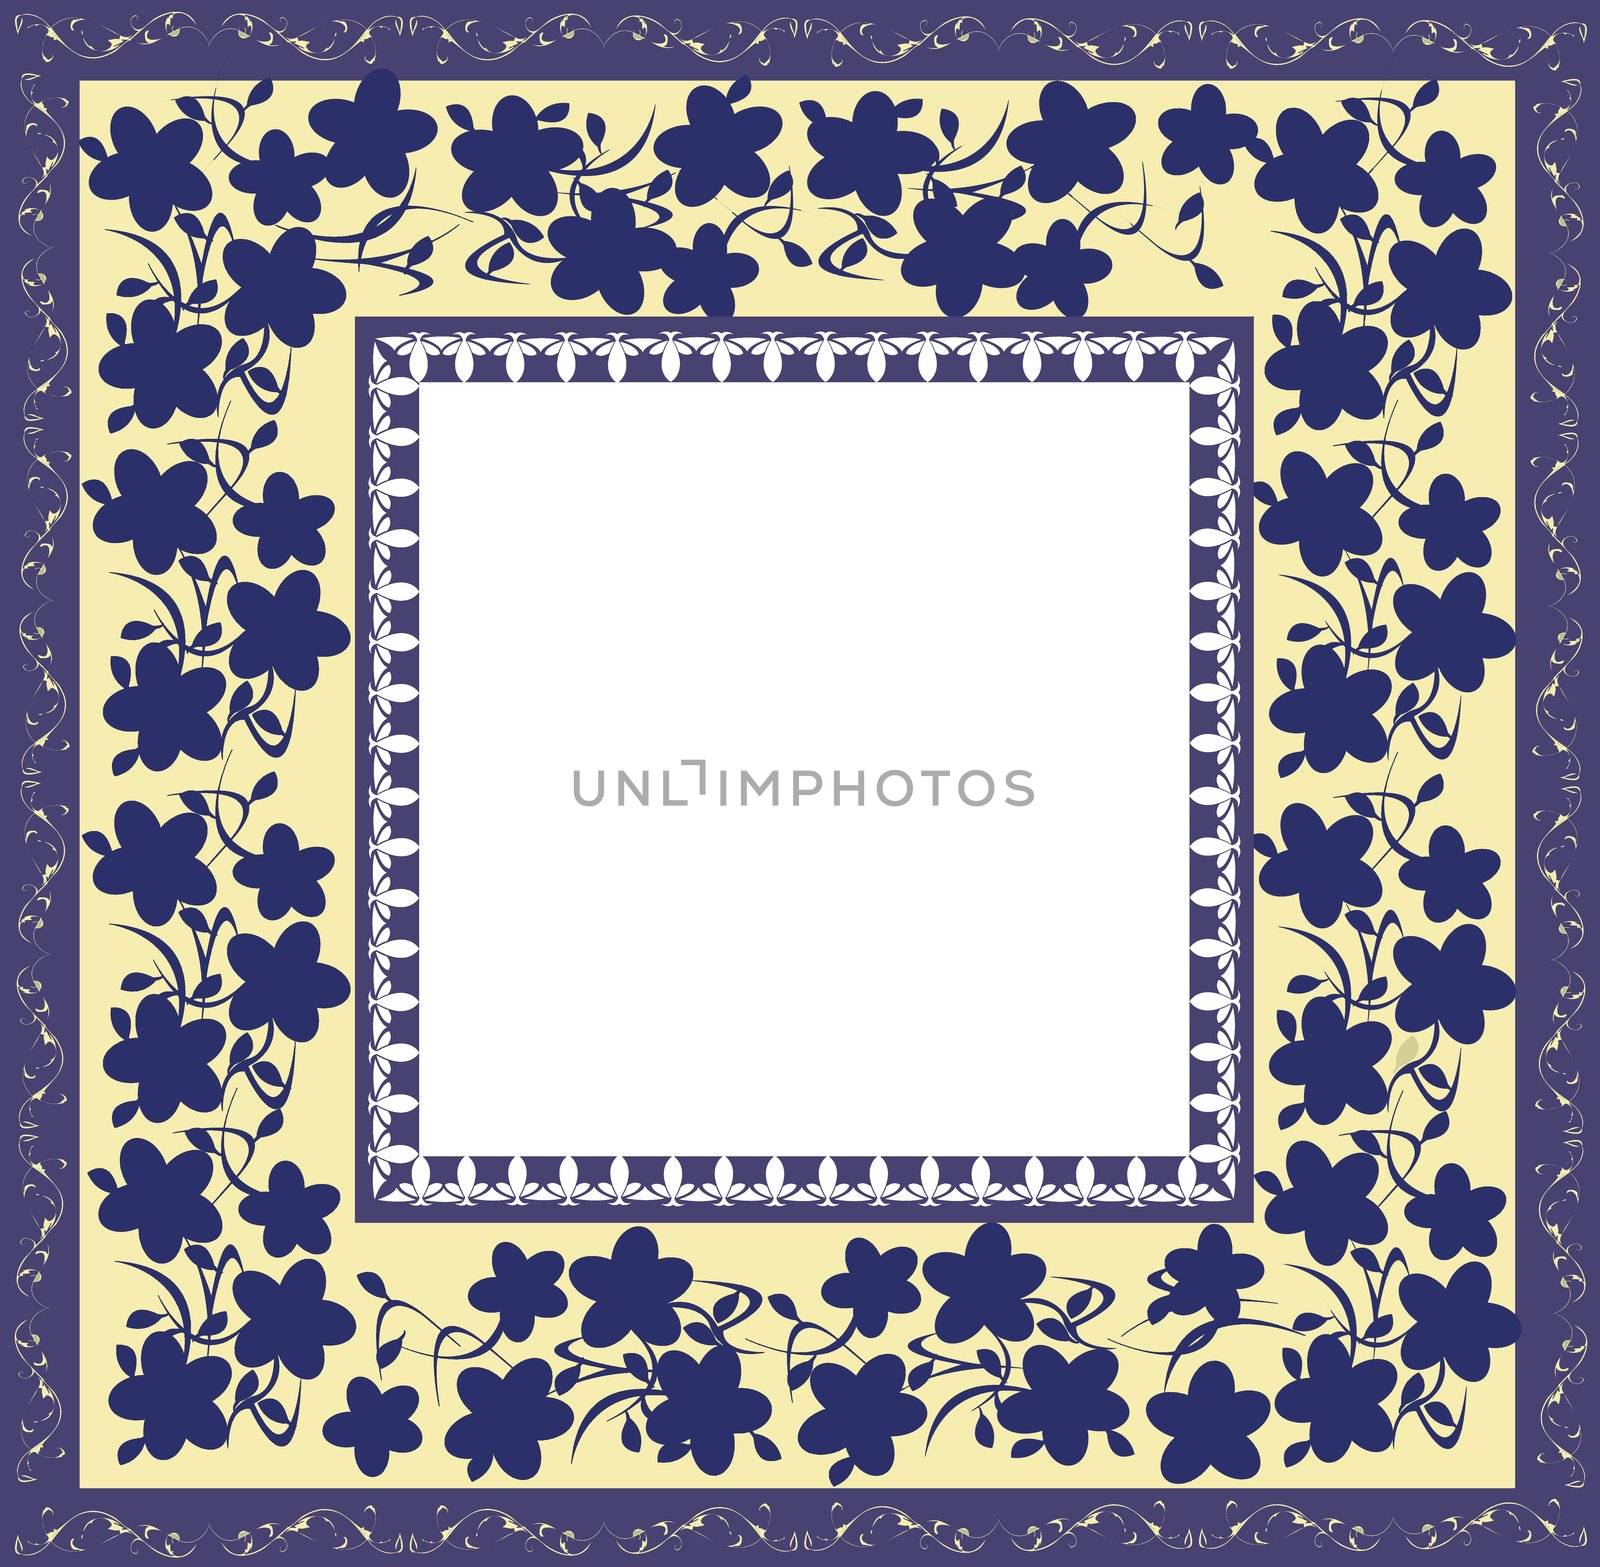 Stylized floral frame for photography or backgrounds